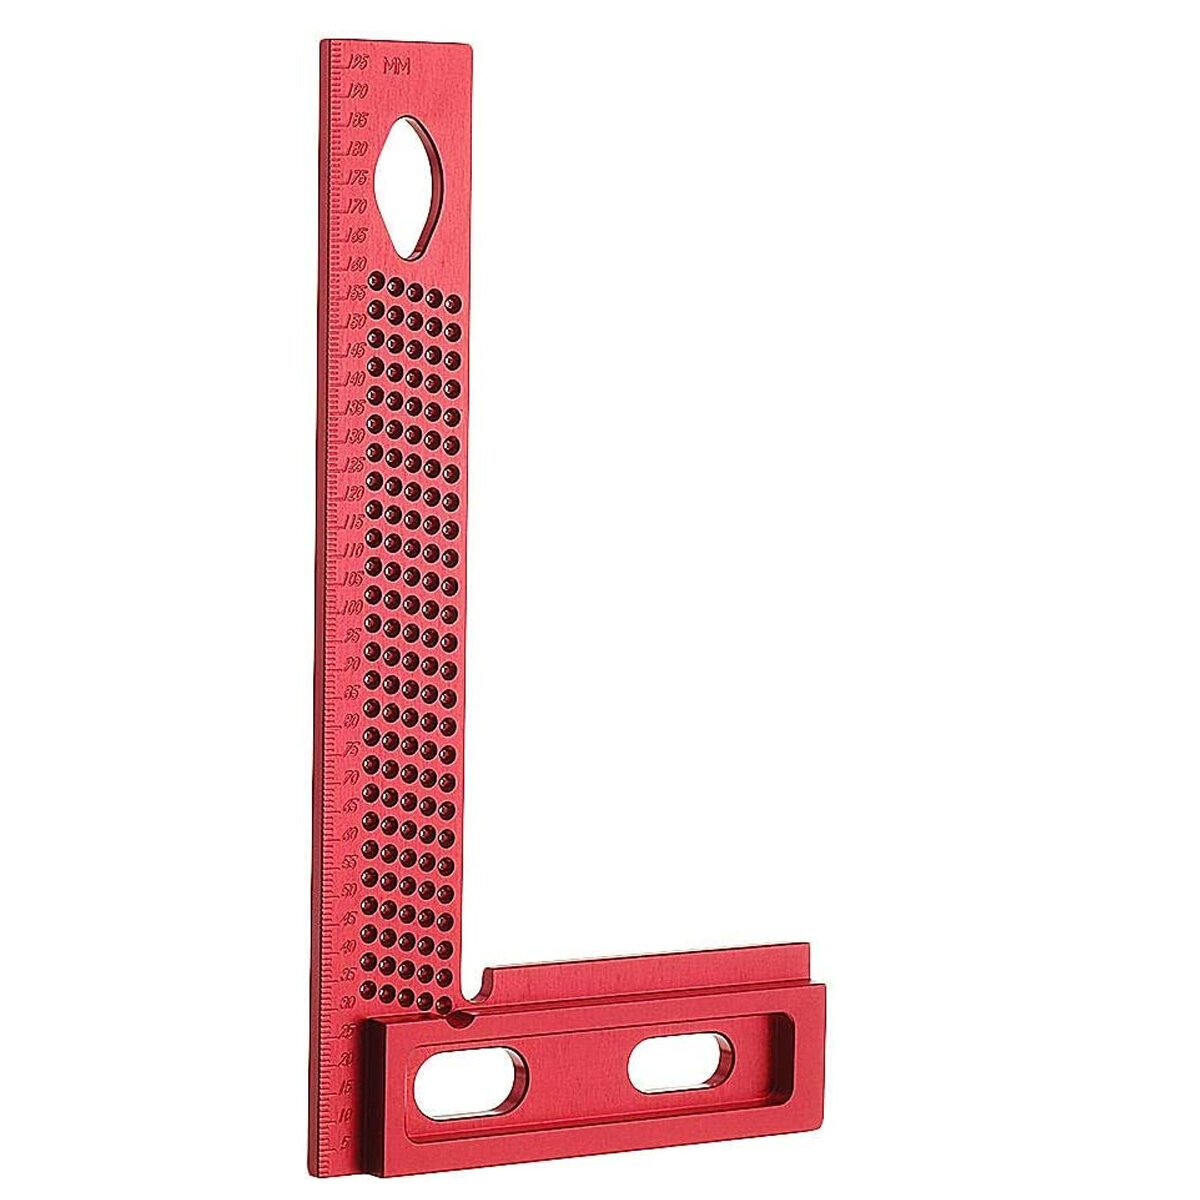 

90 Degree Aluminum Alloy Square Ruler with Metric Scale Height Gauge Right Angle Corner Carpenter Tool Essential Woodwor